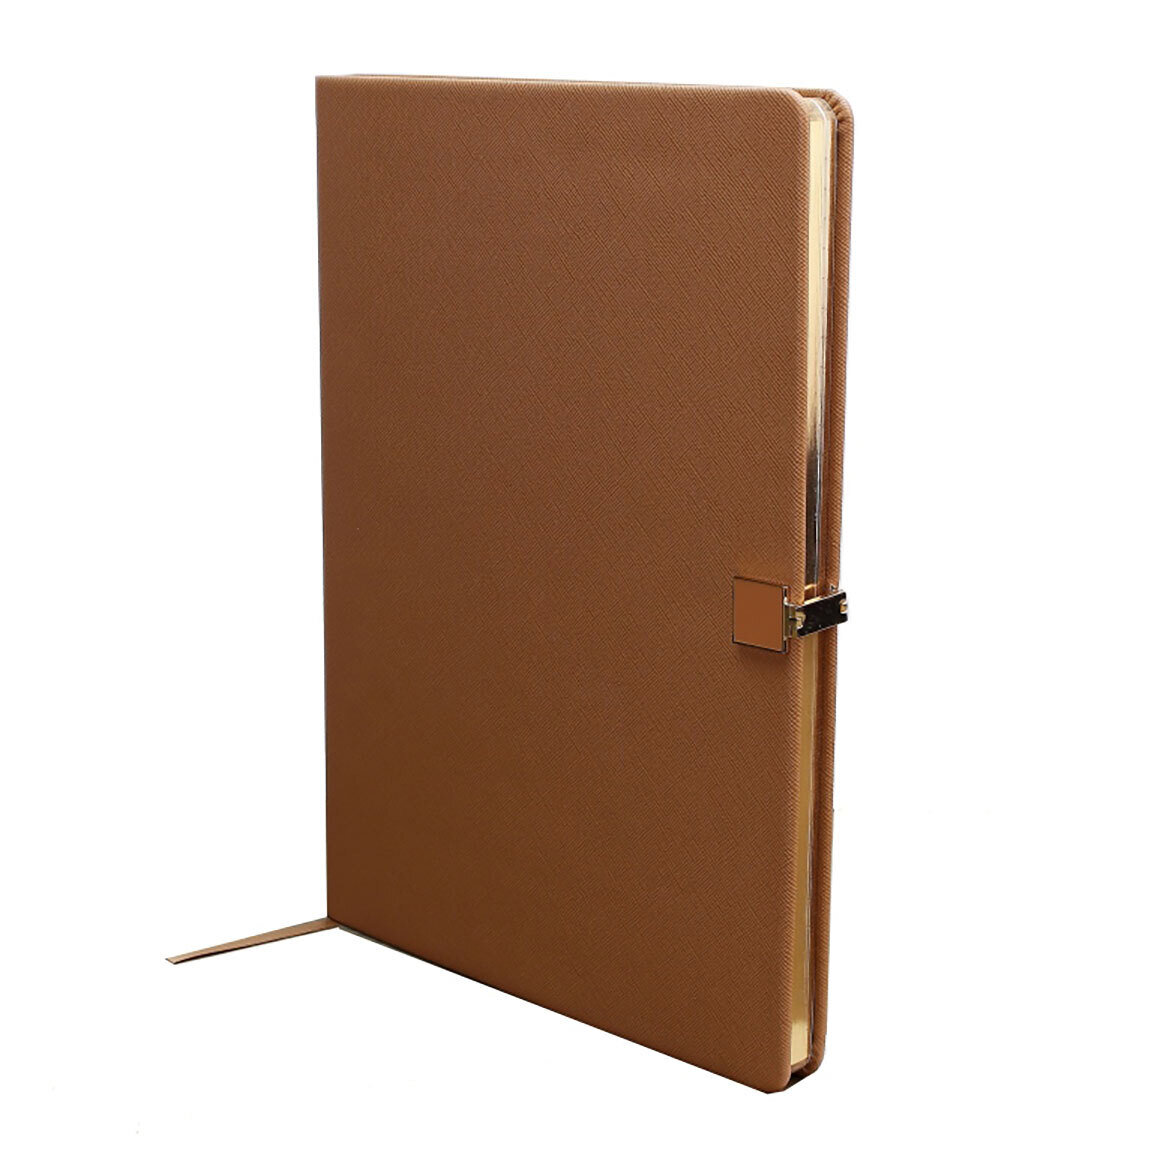 Addison Ross Tan & Gold A4 Notebook A4 Inch Pu Leather NB1151